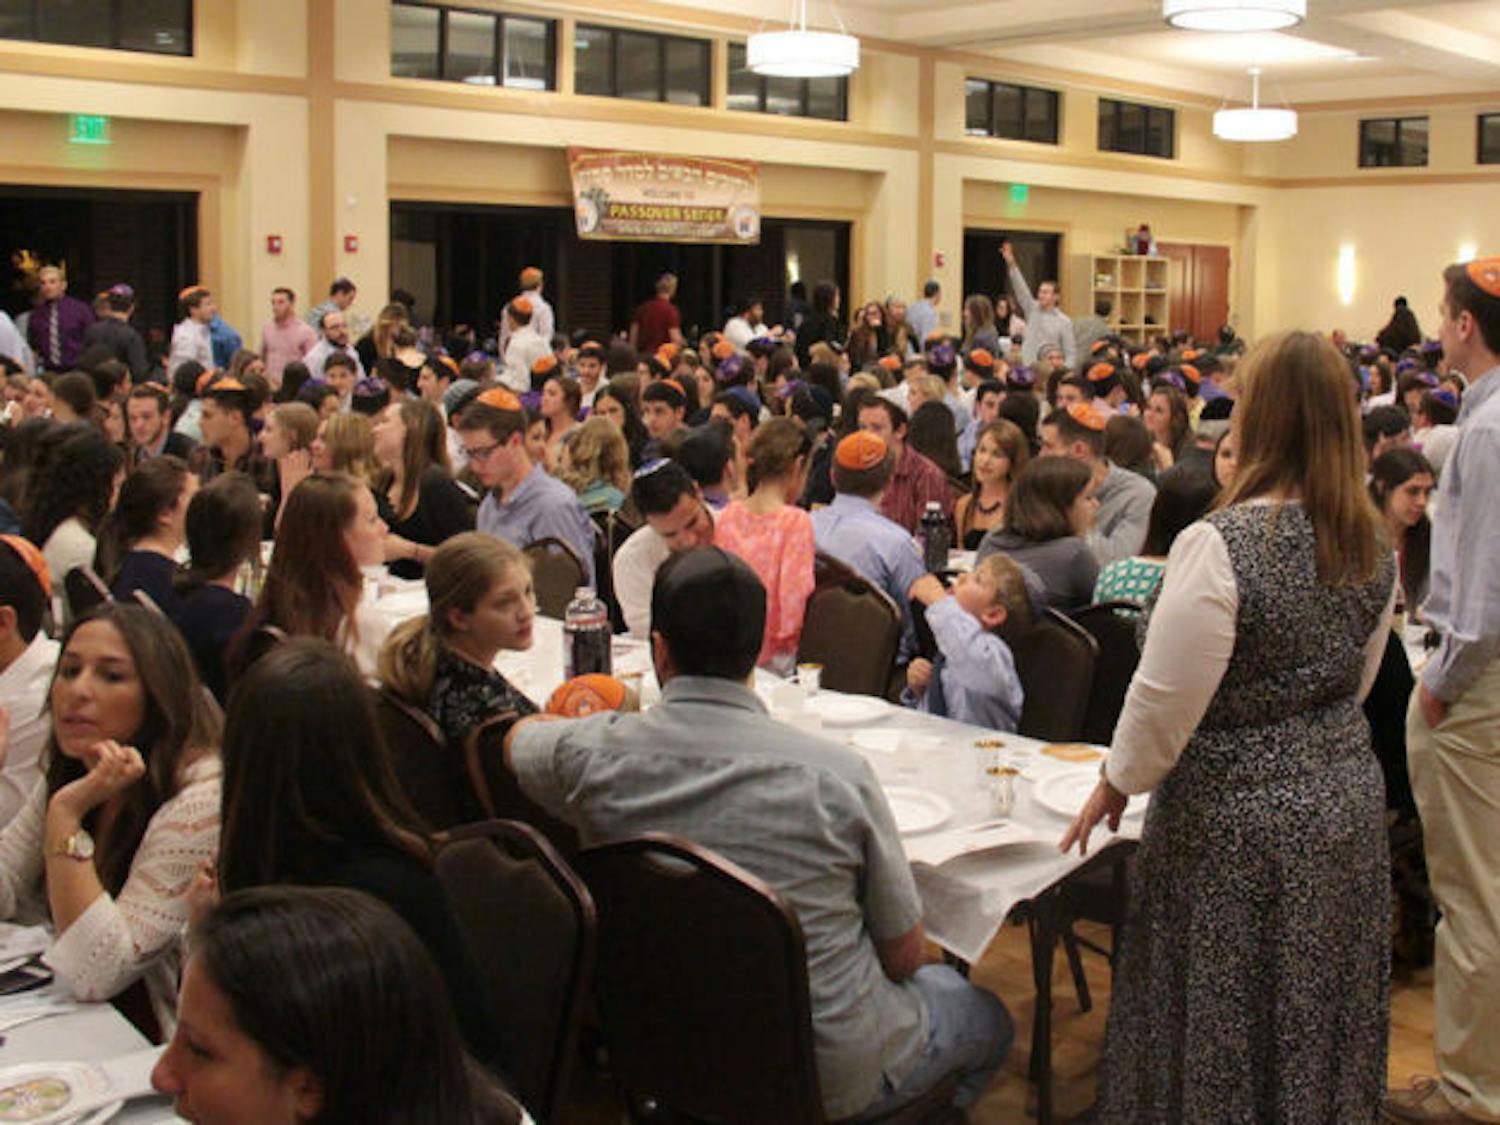 Students and residents gather at the Lubavitch-Chabad Jewish Student and Community Center for Seder on Monday evening. The event celebrated the first night of the Jewish holiday of Passover.